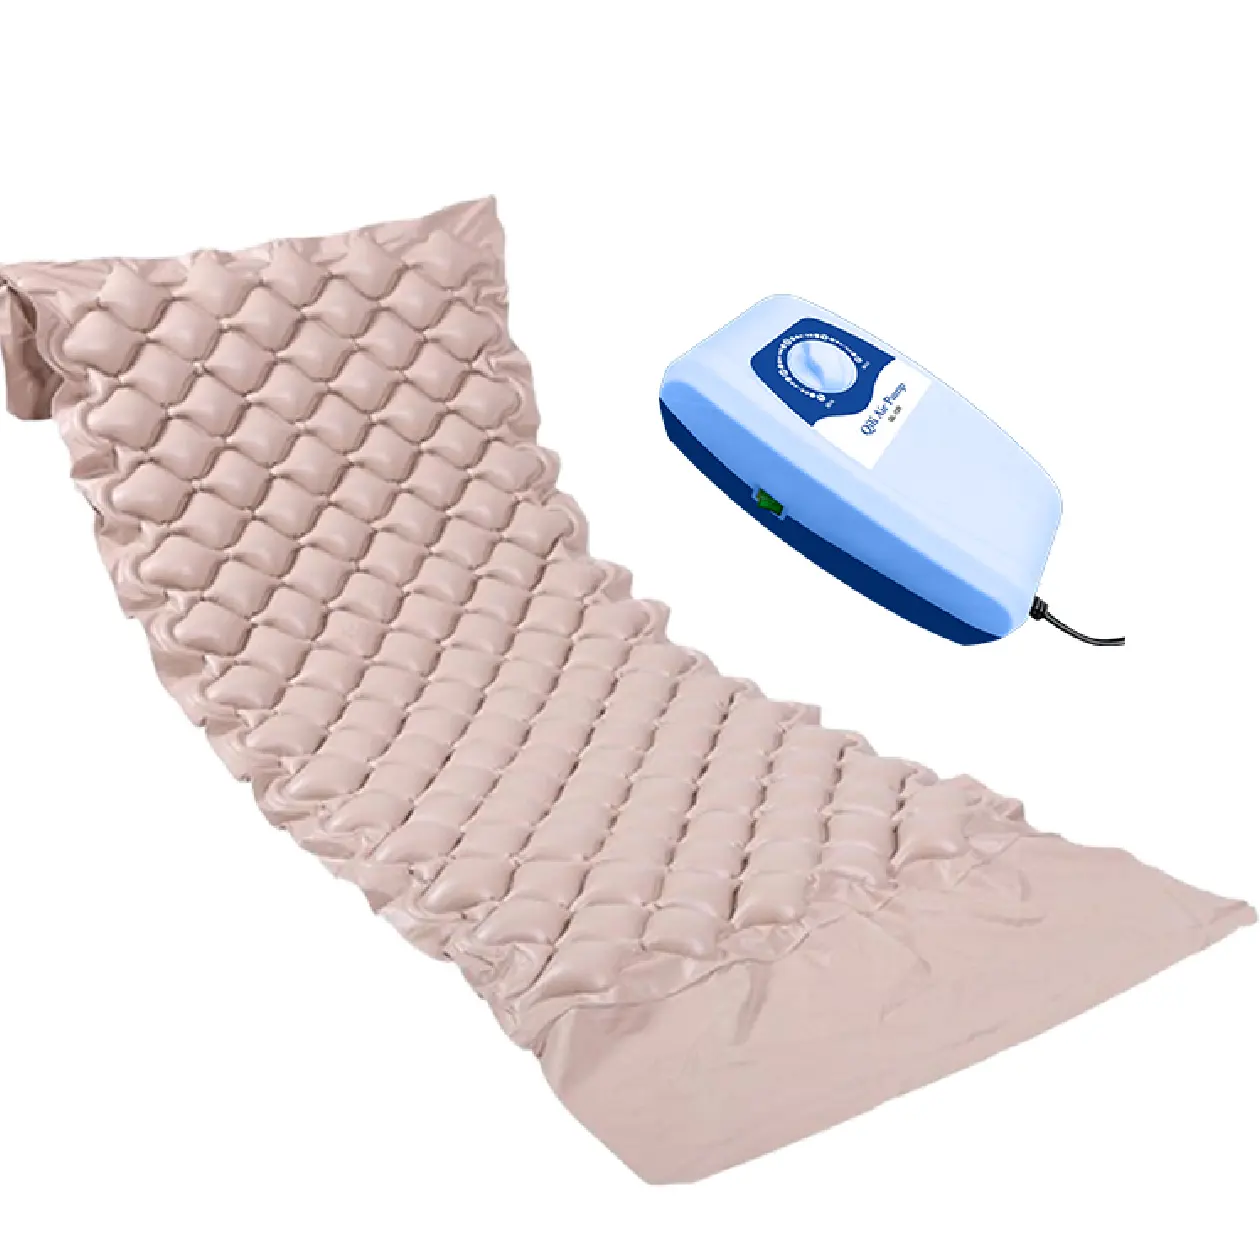 Inflatable Alternating pressure Anti bedsore pressure medical mattress with pump for bedridden patients